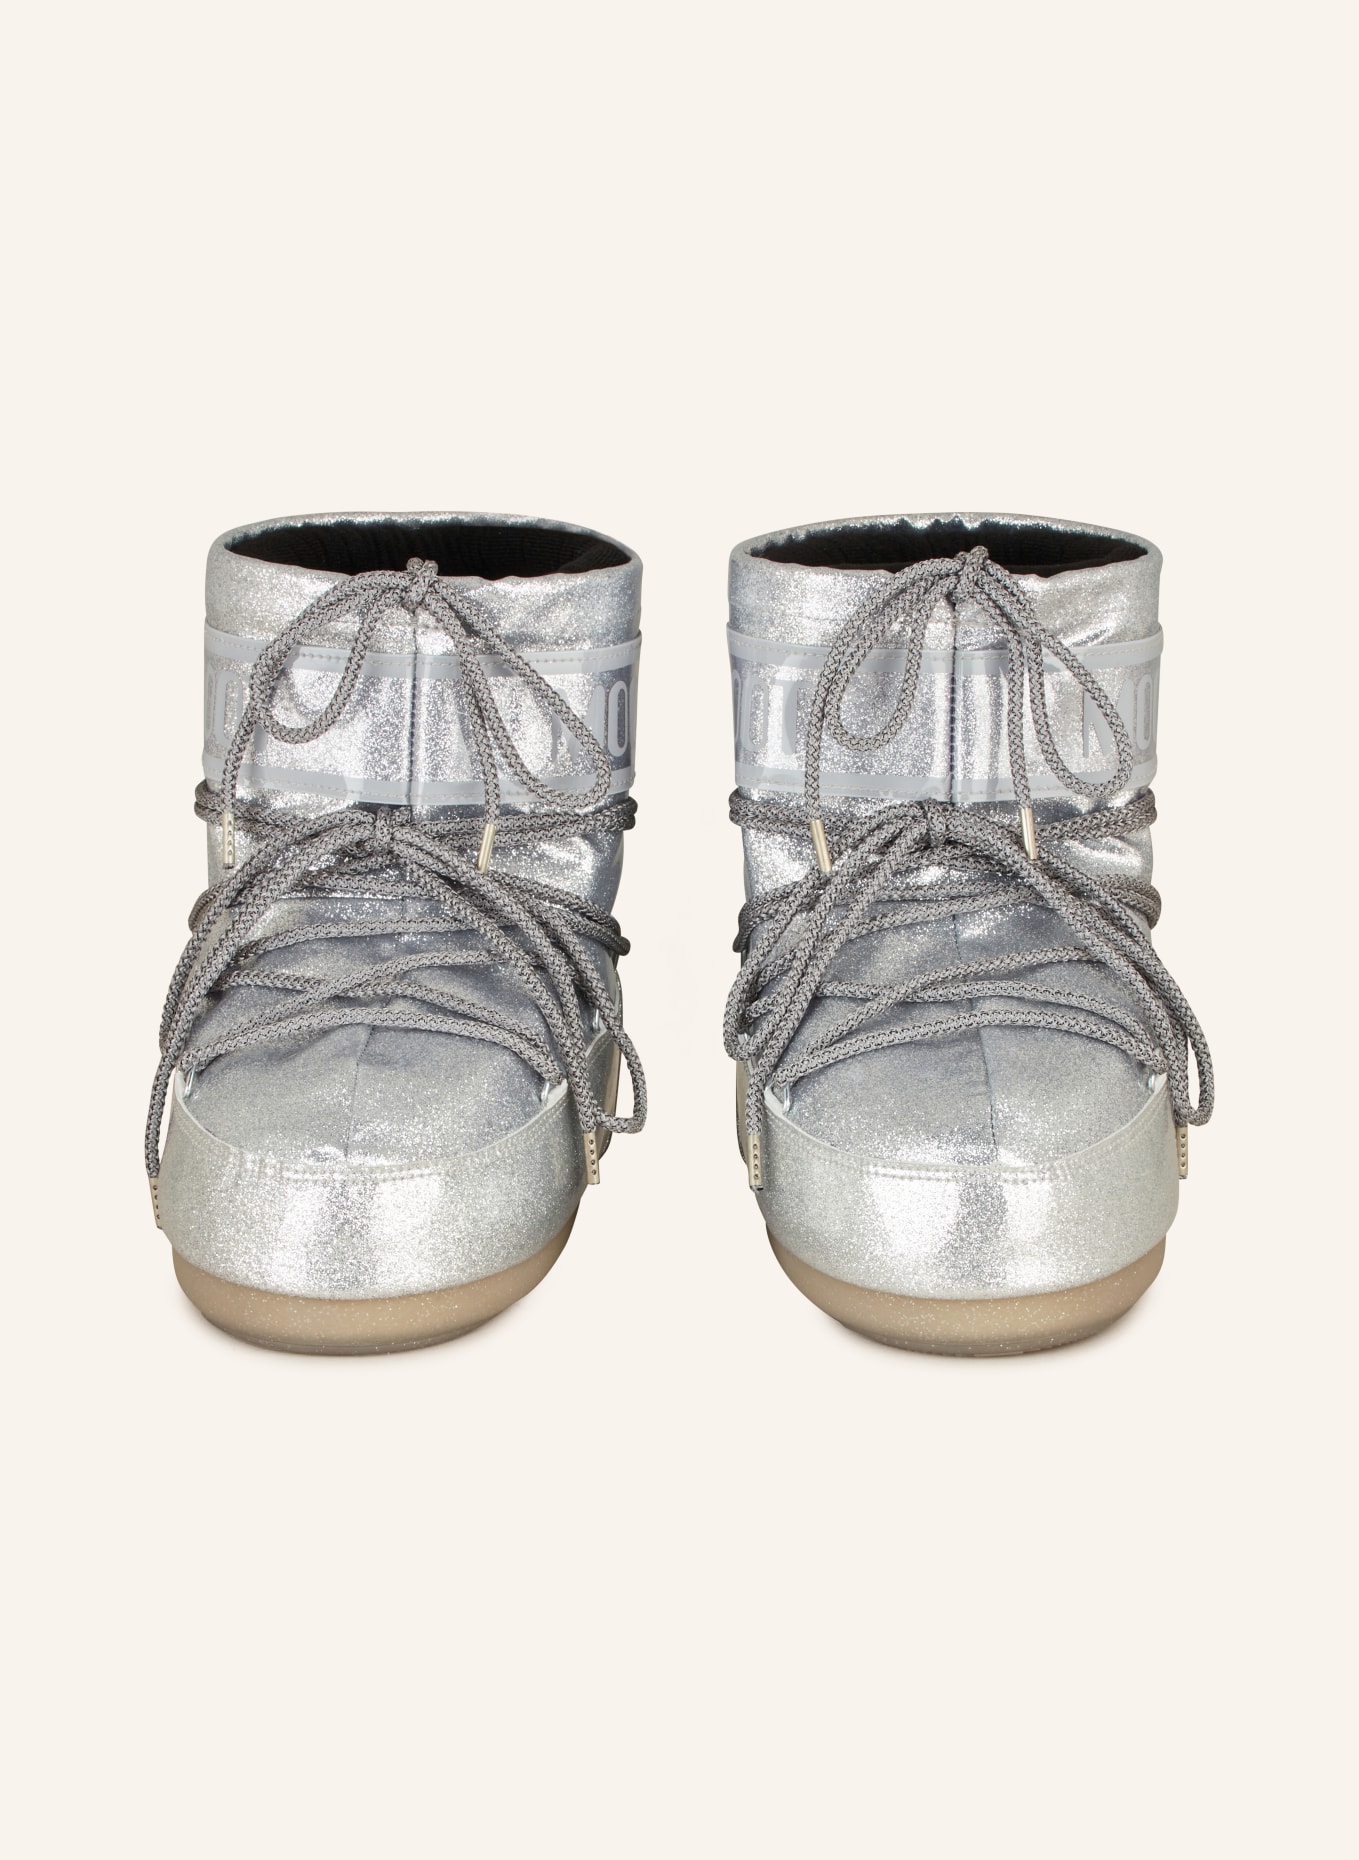 MOON BOOT Moon Boots ICON LOW GLITTER, Farbe: SILBER (Bild 3)